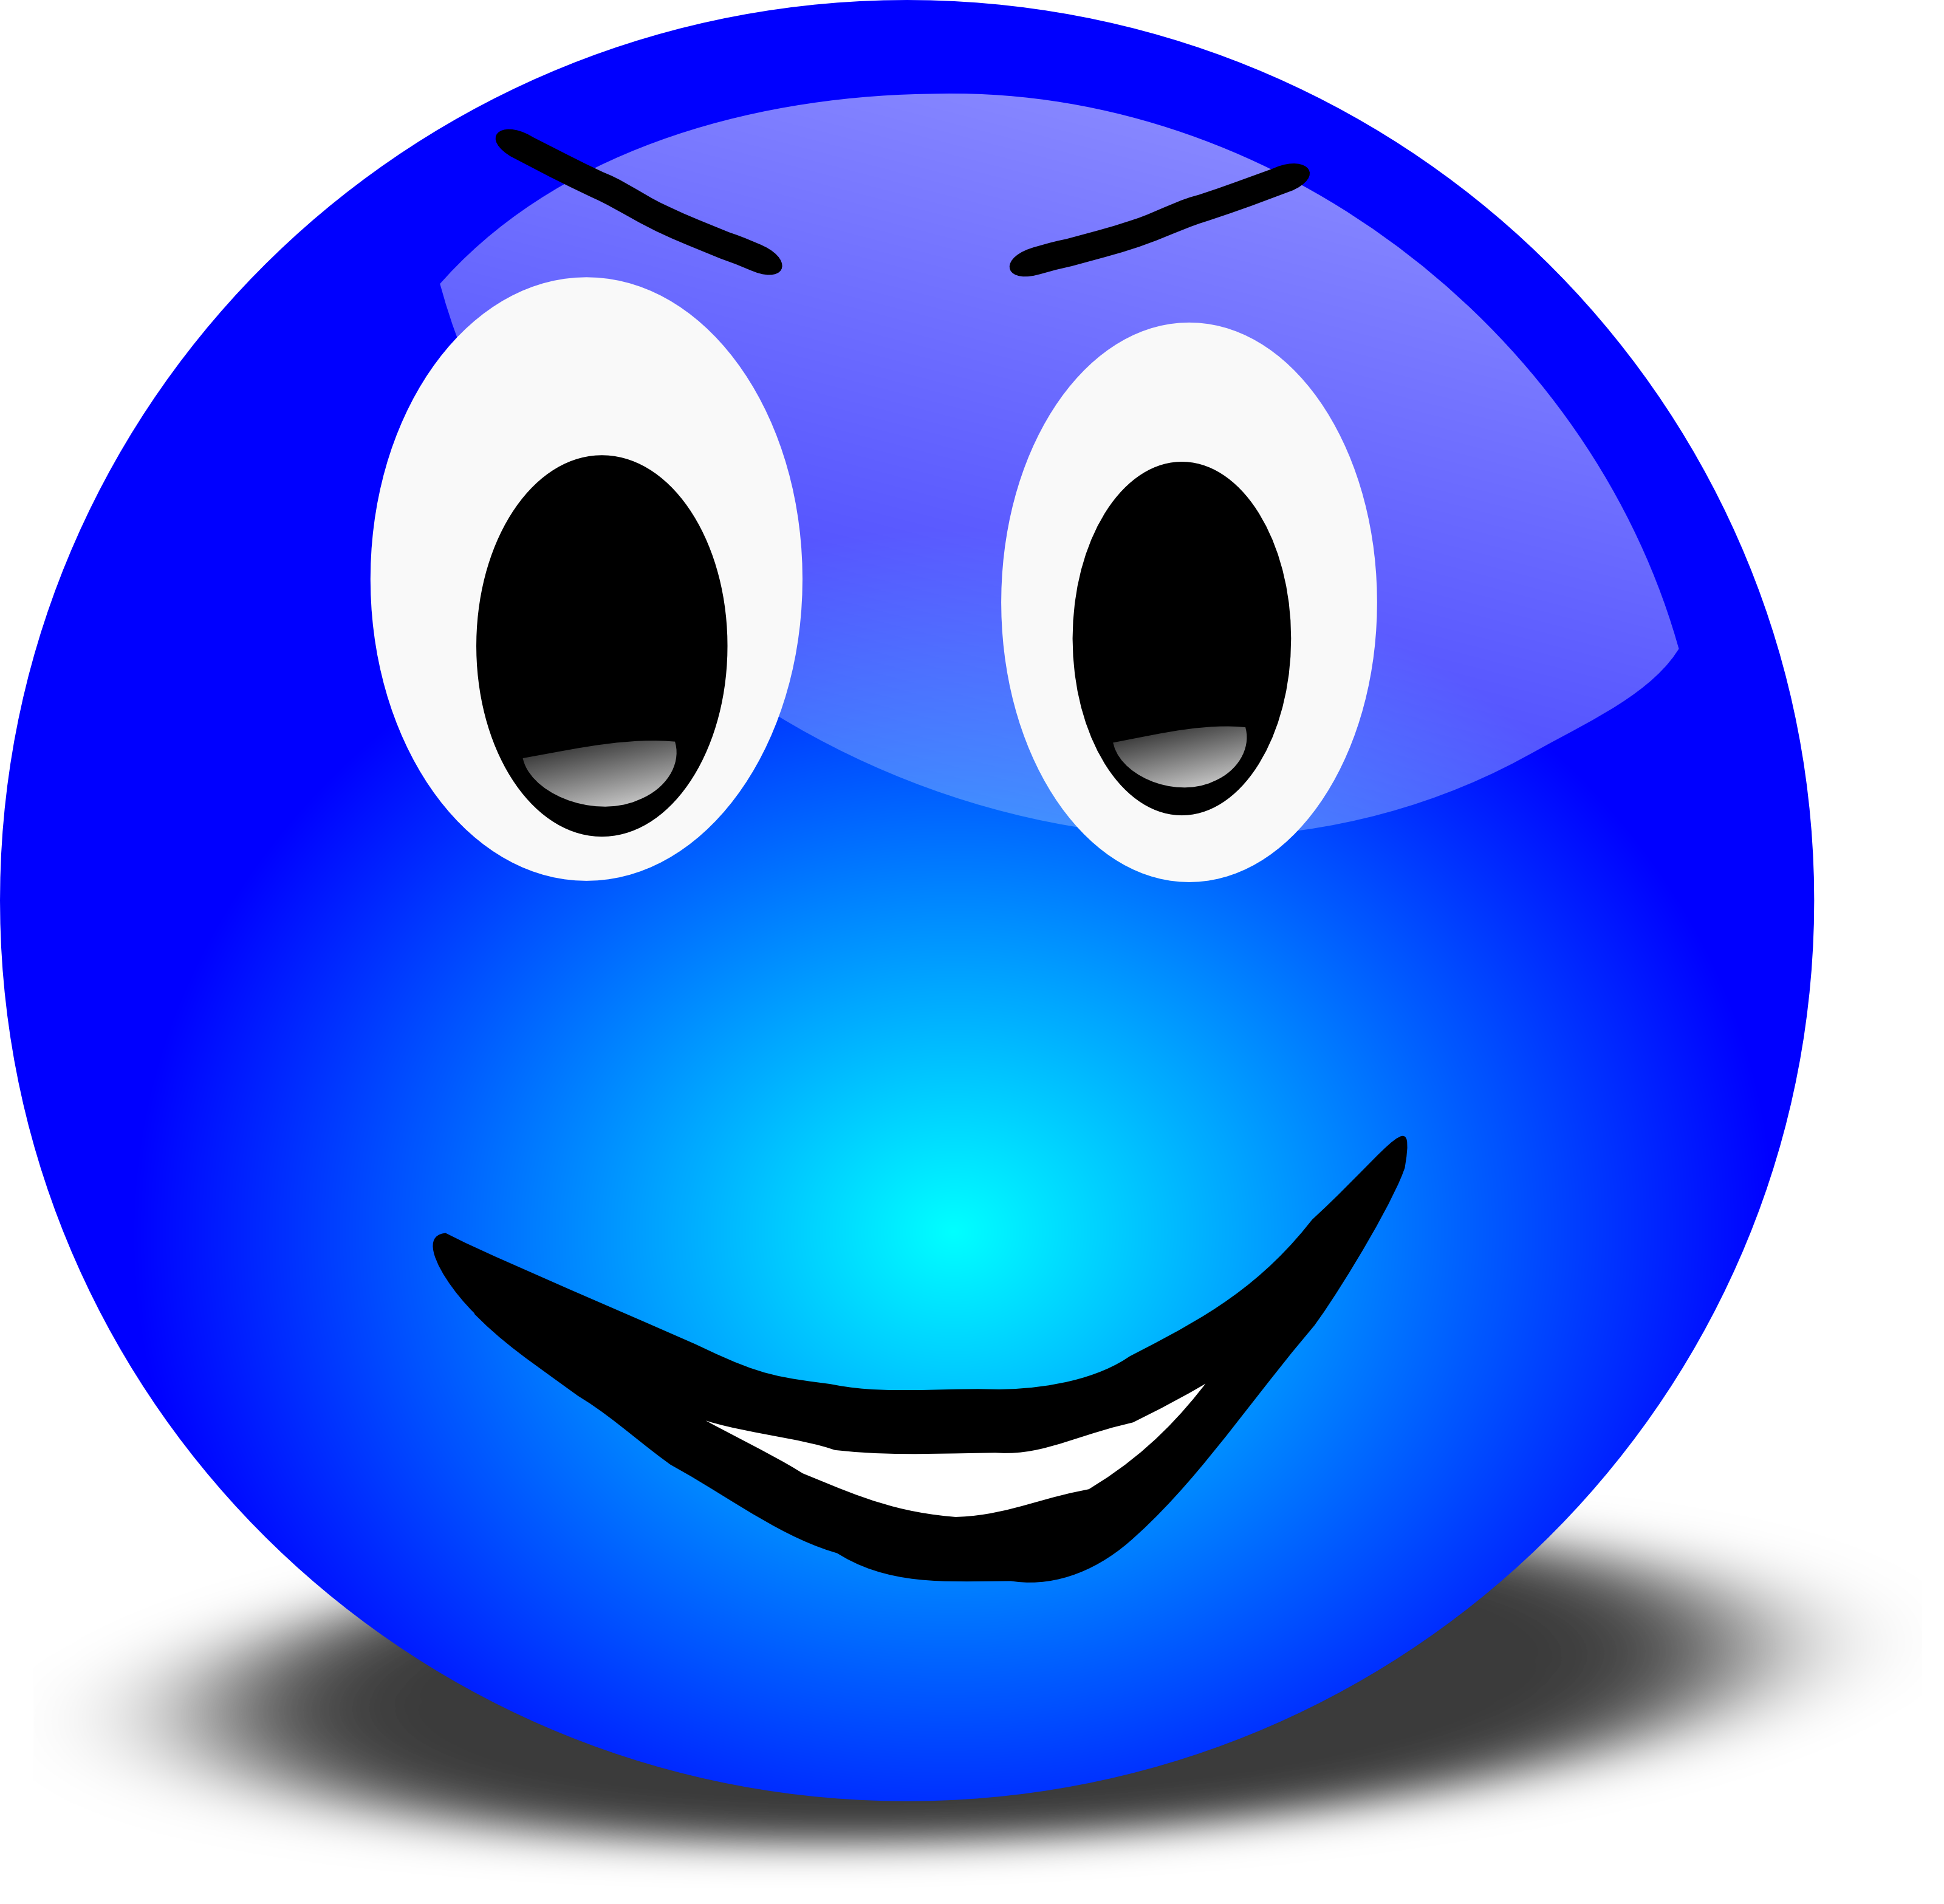 Free 3d Grinning Blue Smiley Face Clipart Illustration